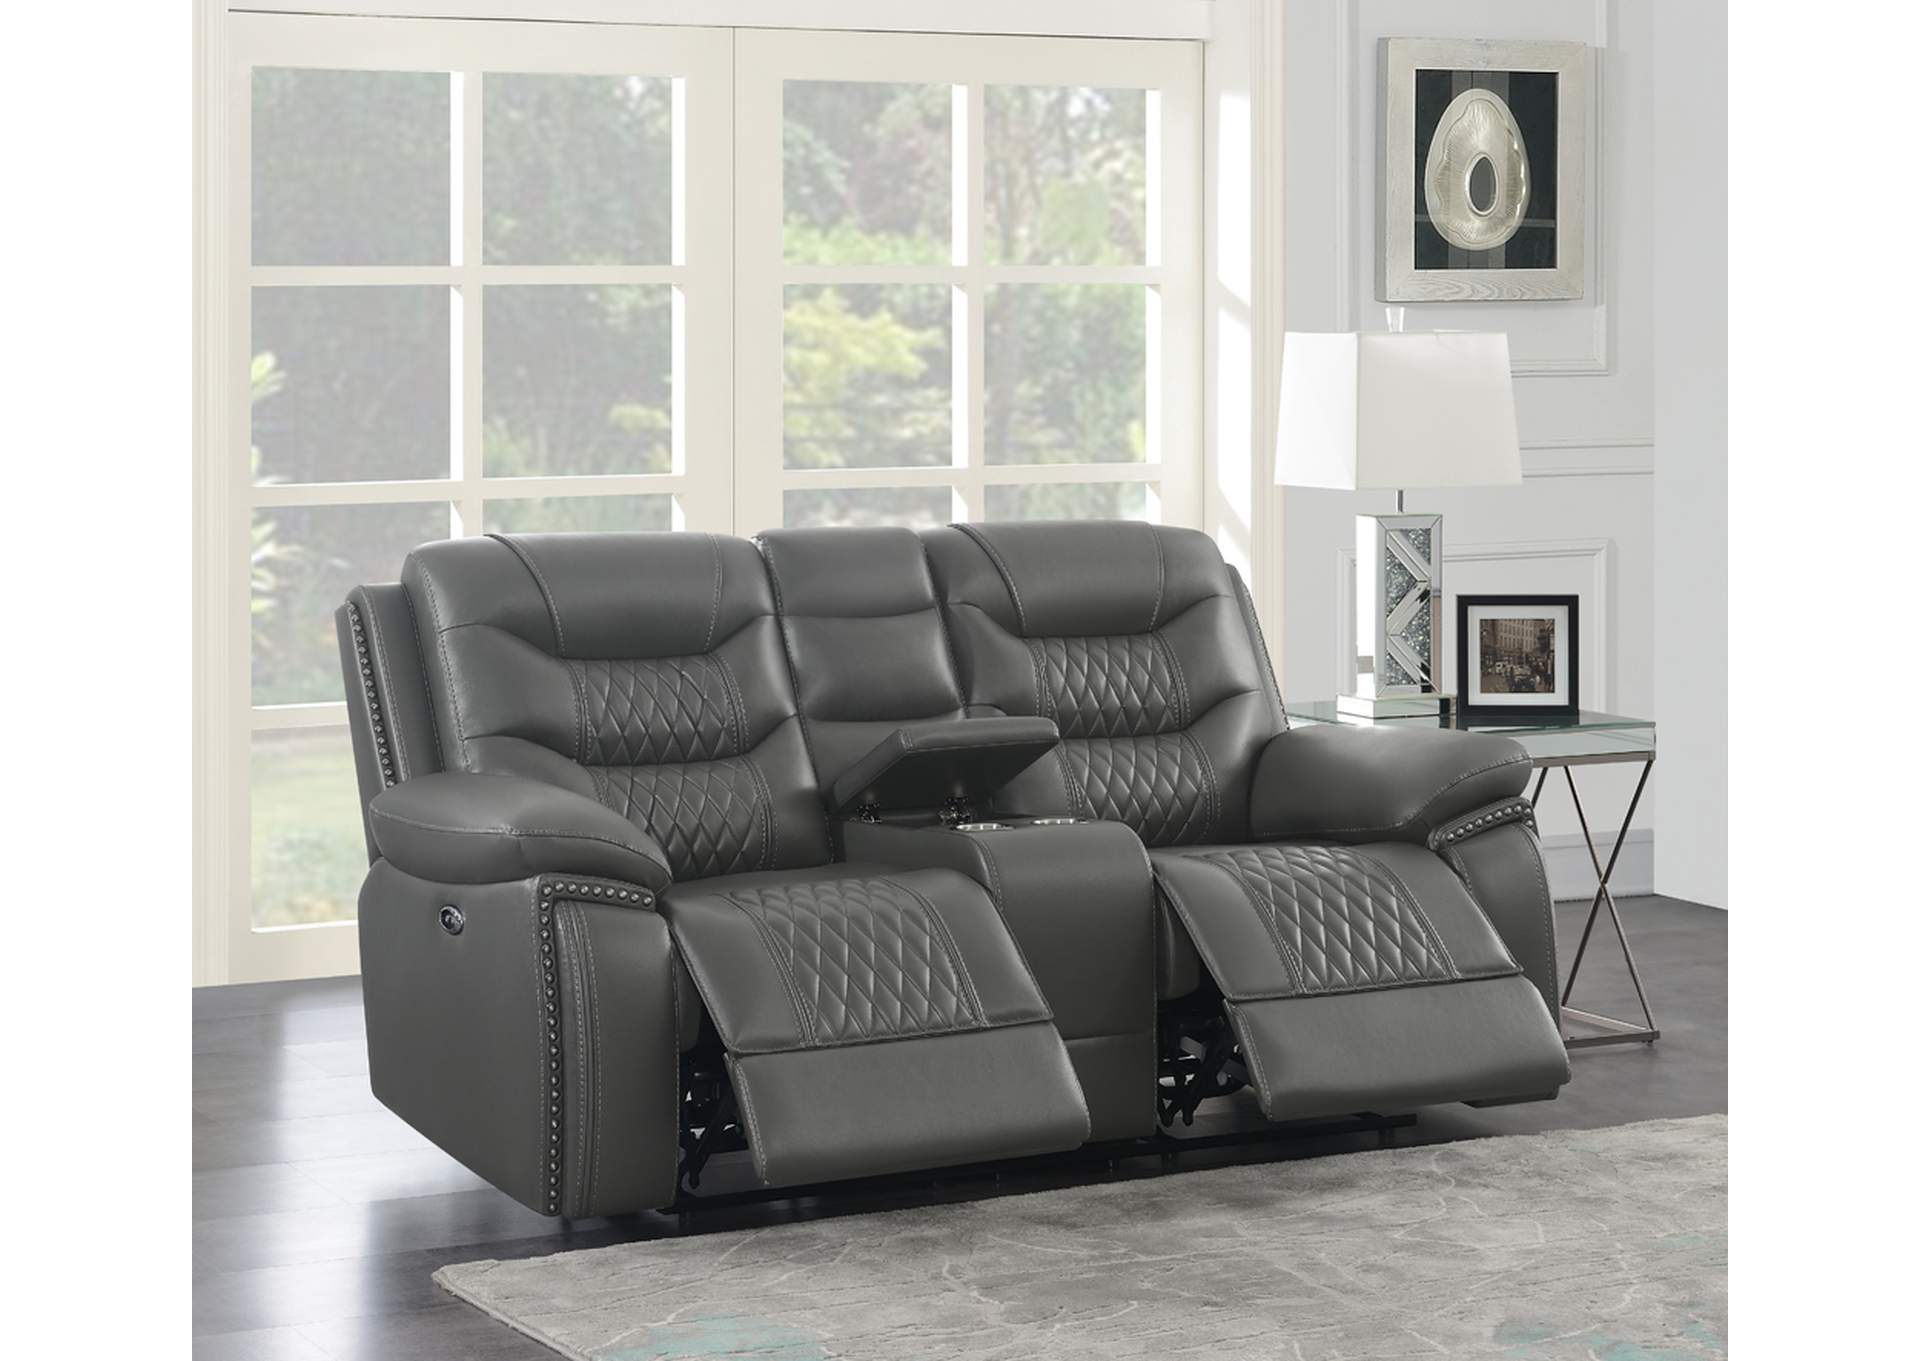 Flamenco Tufted Upholstered Power Loveseat with Console Charcoal,Coaster Furniture